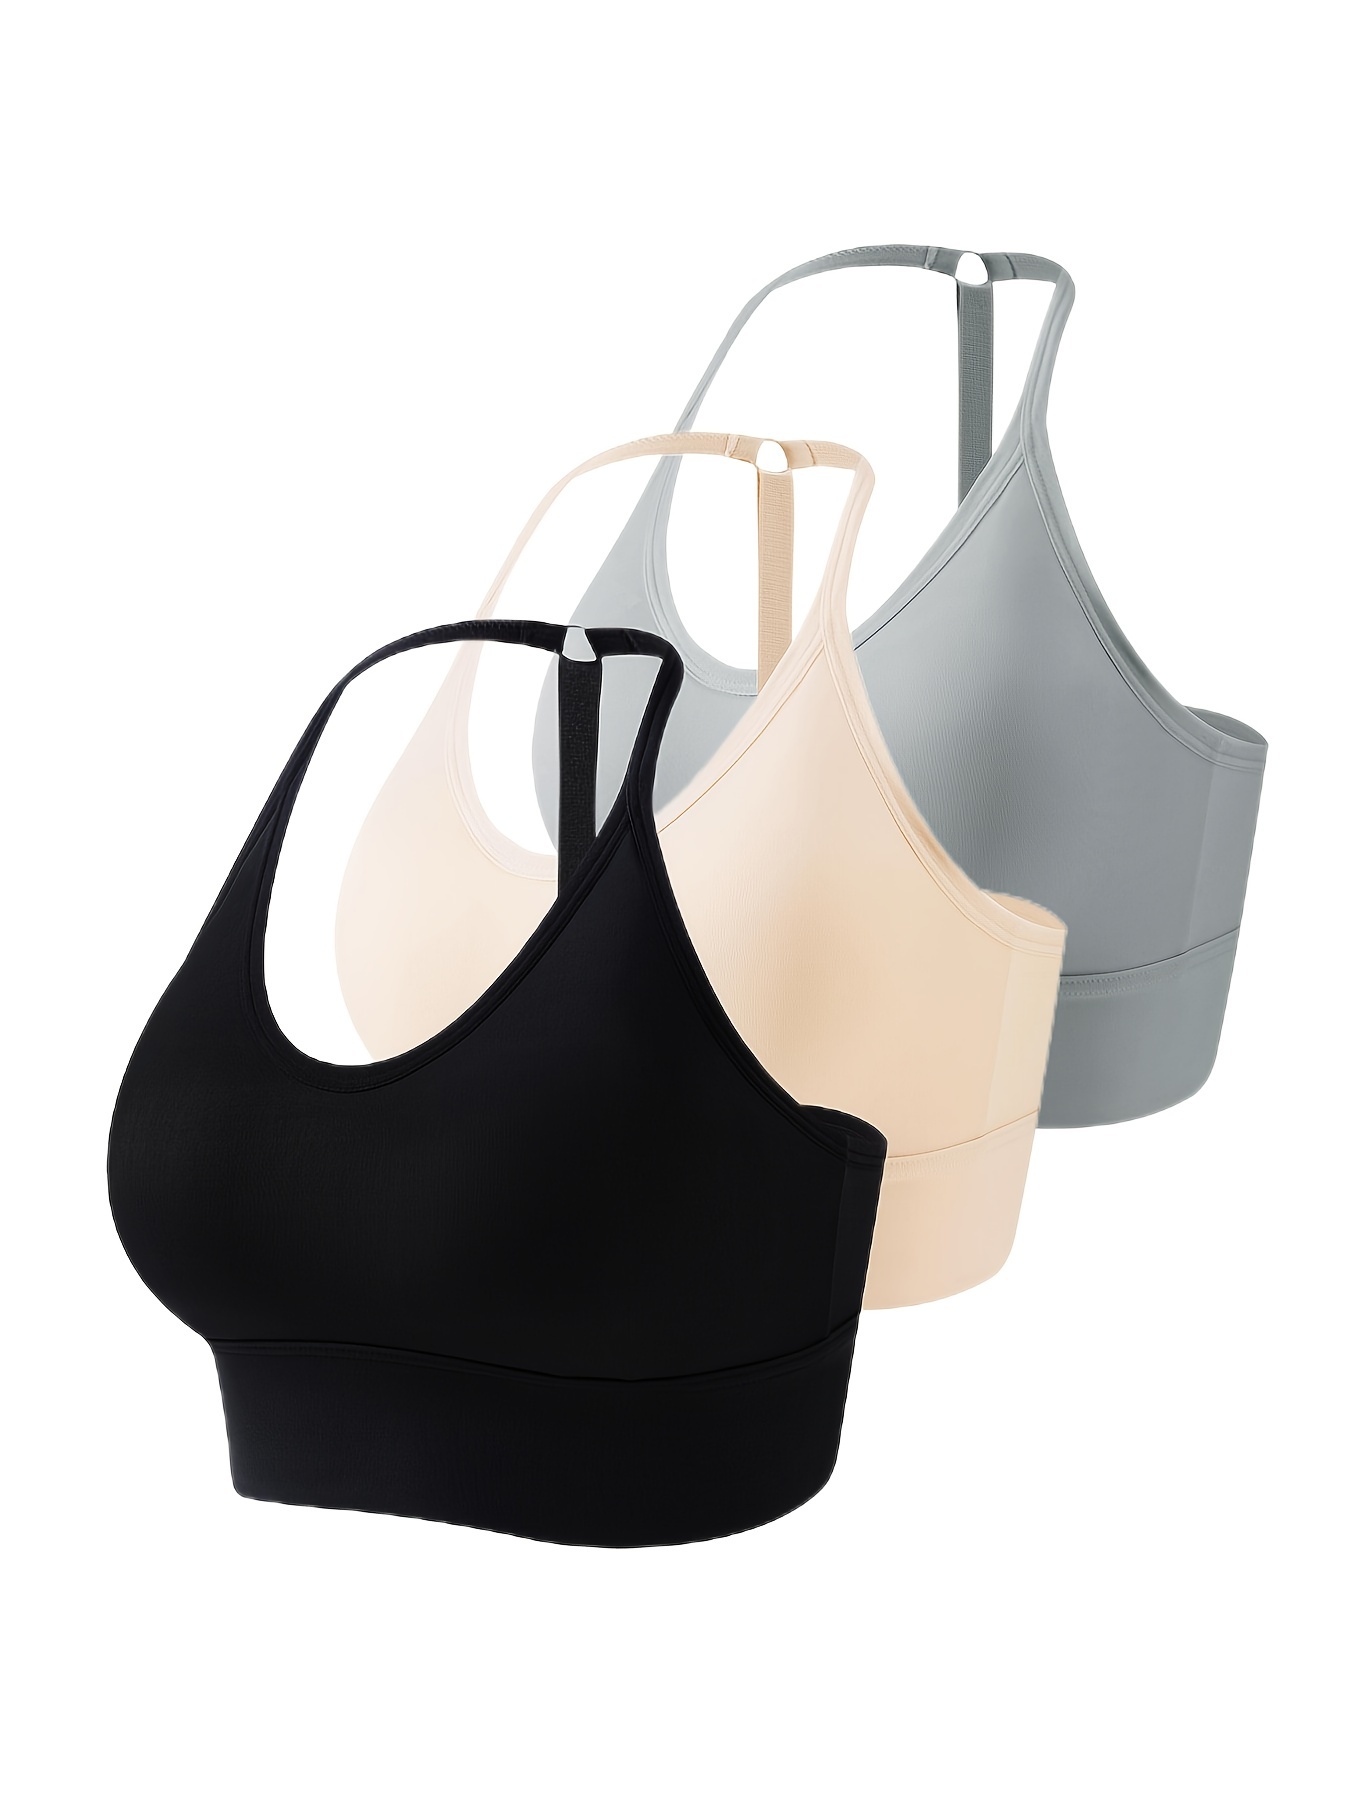 3pcs Seamless Comfortable Sports Bra With Removable Pad, Solid Color Yoga  Bra, Women's Activewear